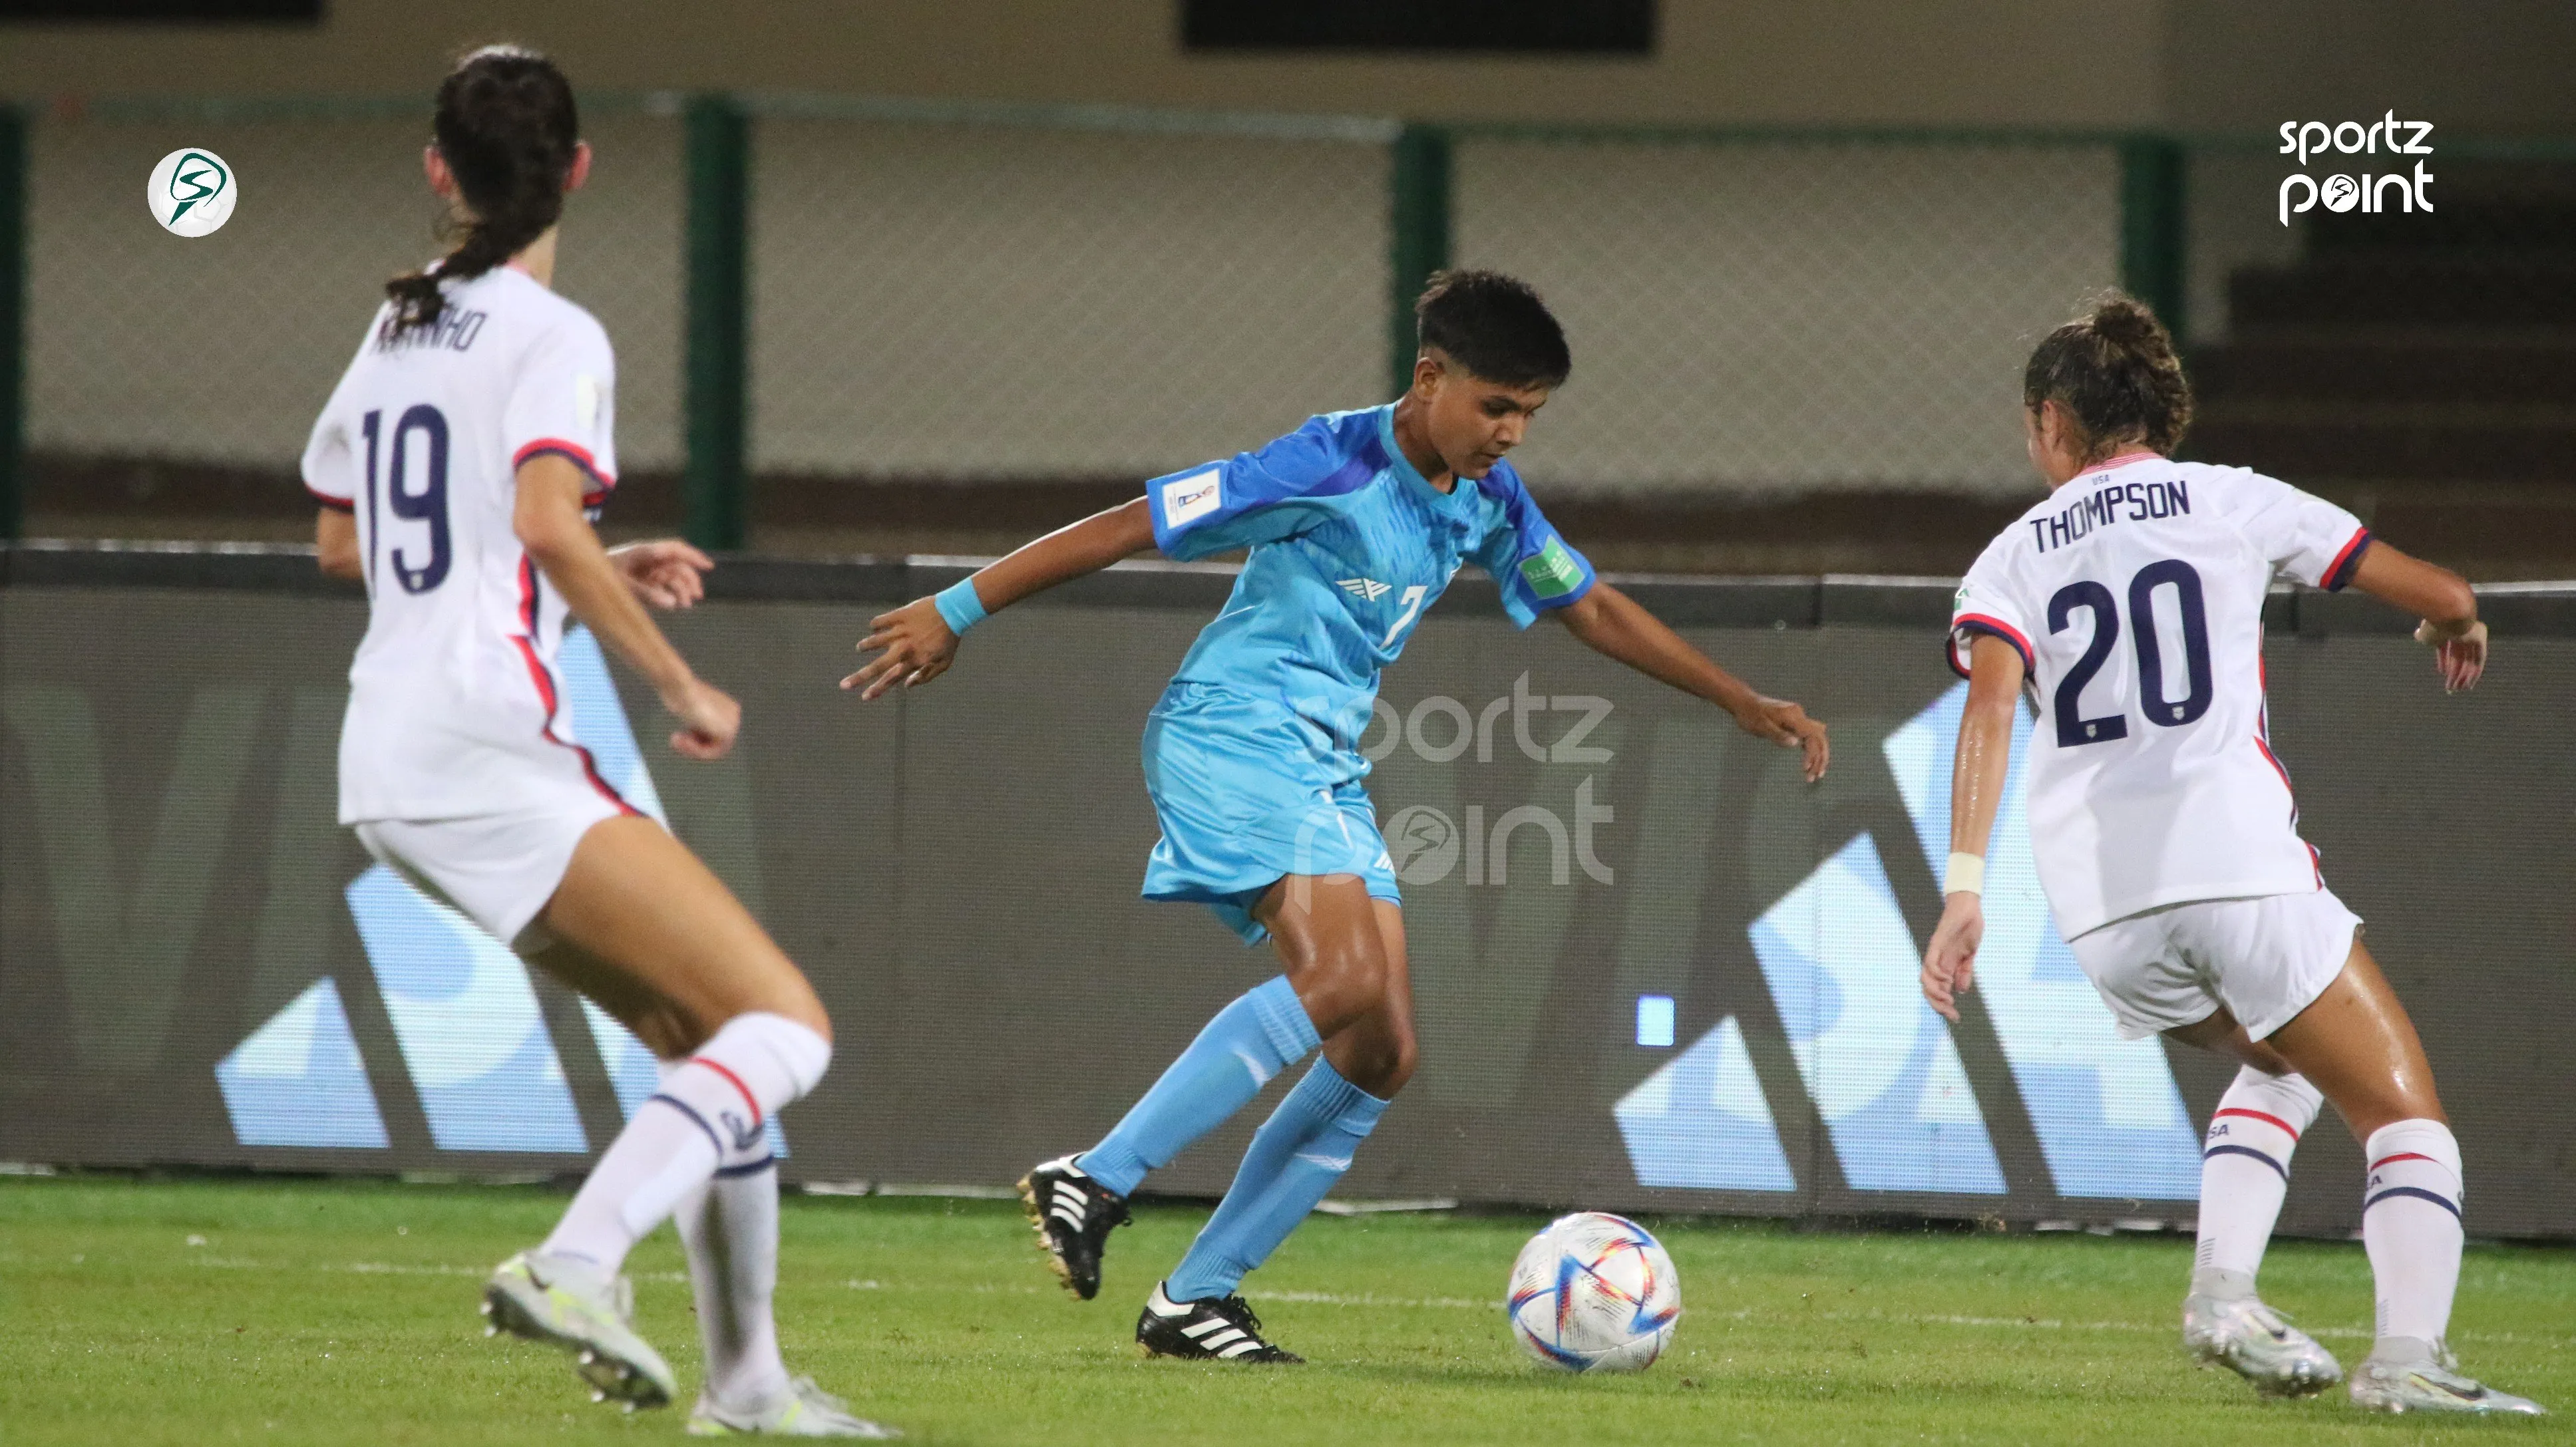 Neha in action against USA in the FIFA U-17 Women's World Cup 2022 in Bhubaneshwar.  Image | Sportz Point